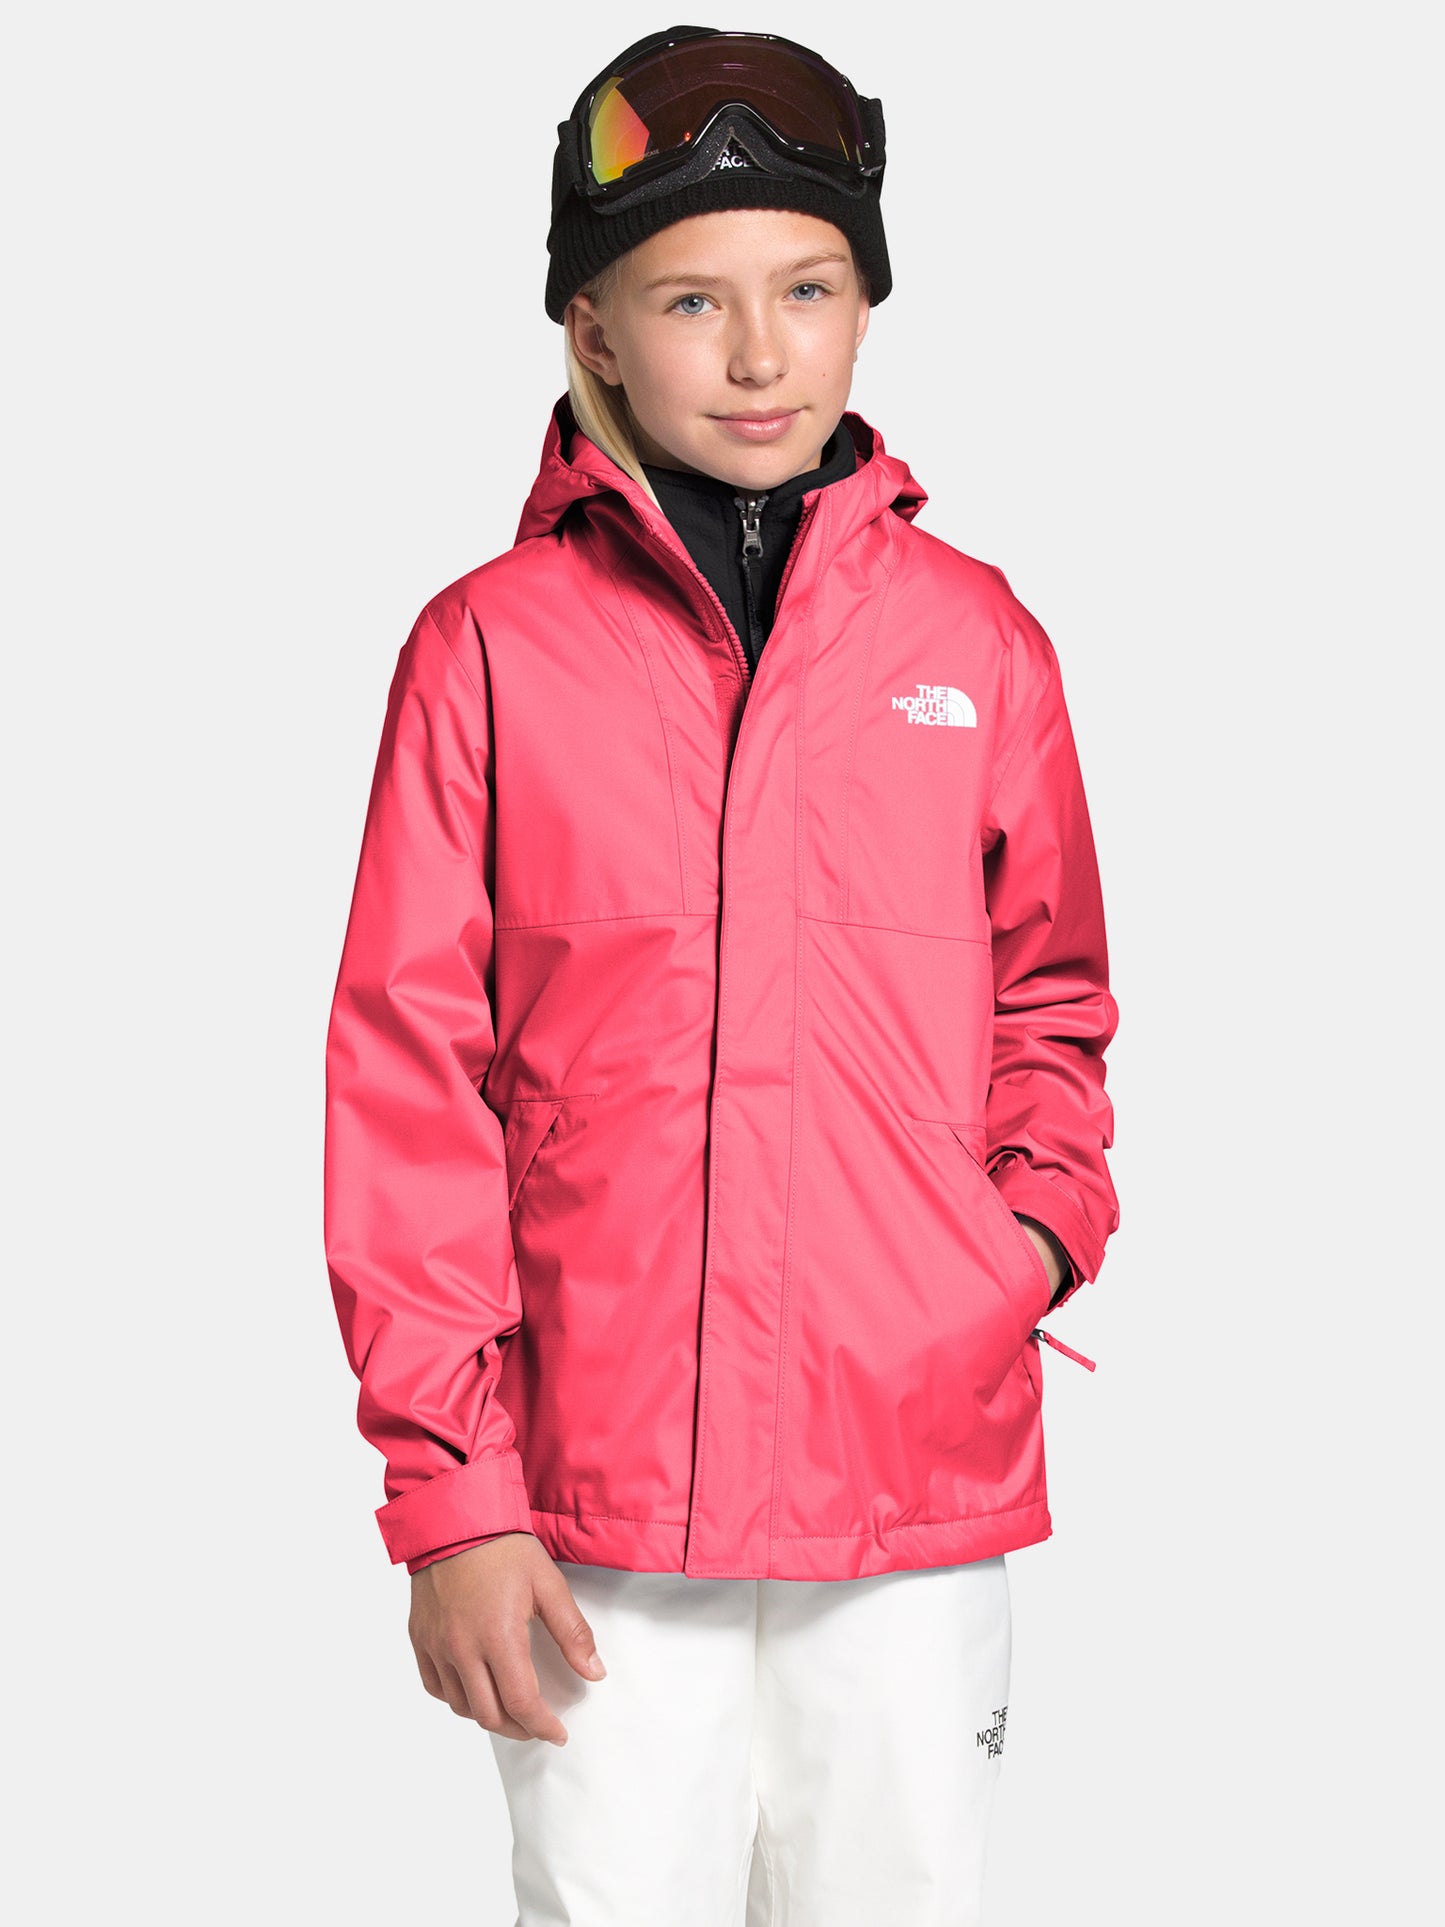 The North Face Girls' Mt. View Triclimate Jacket